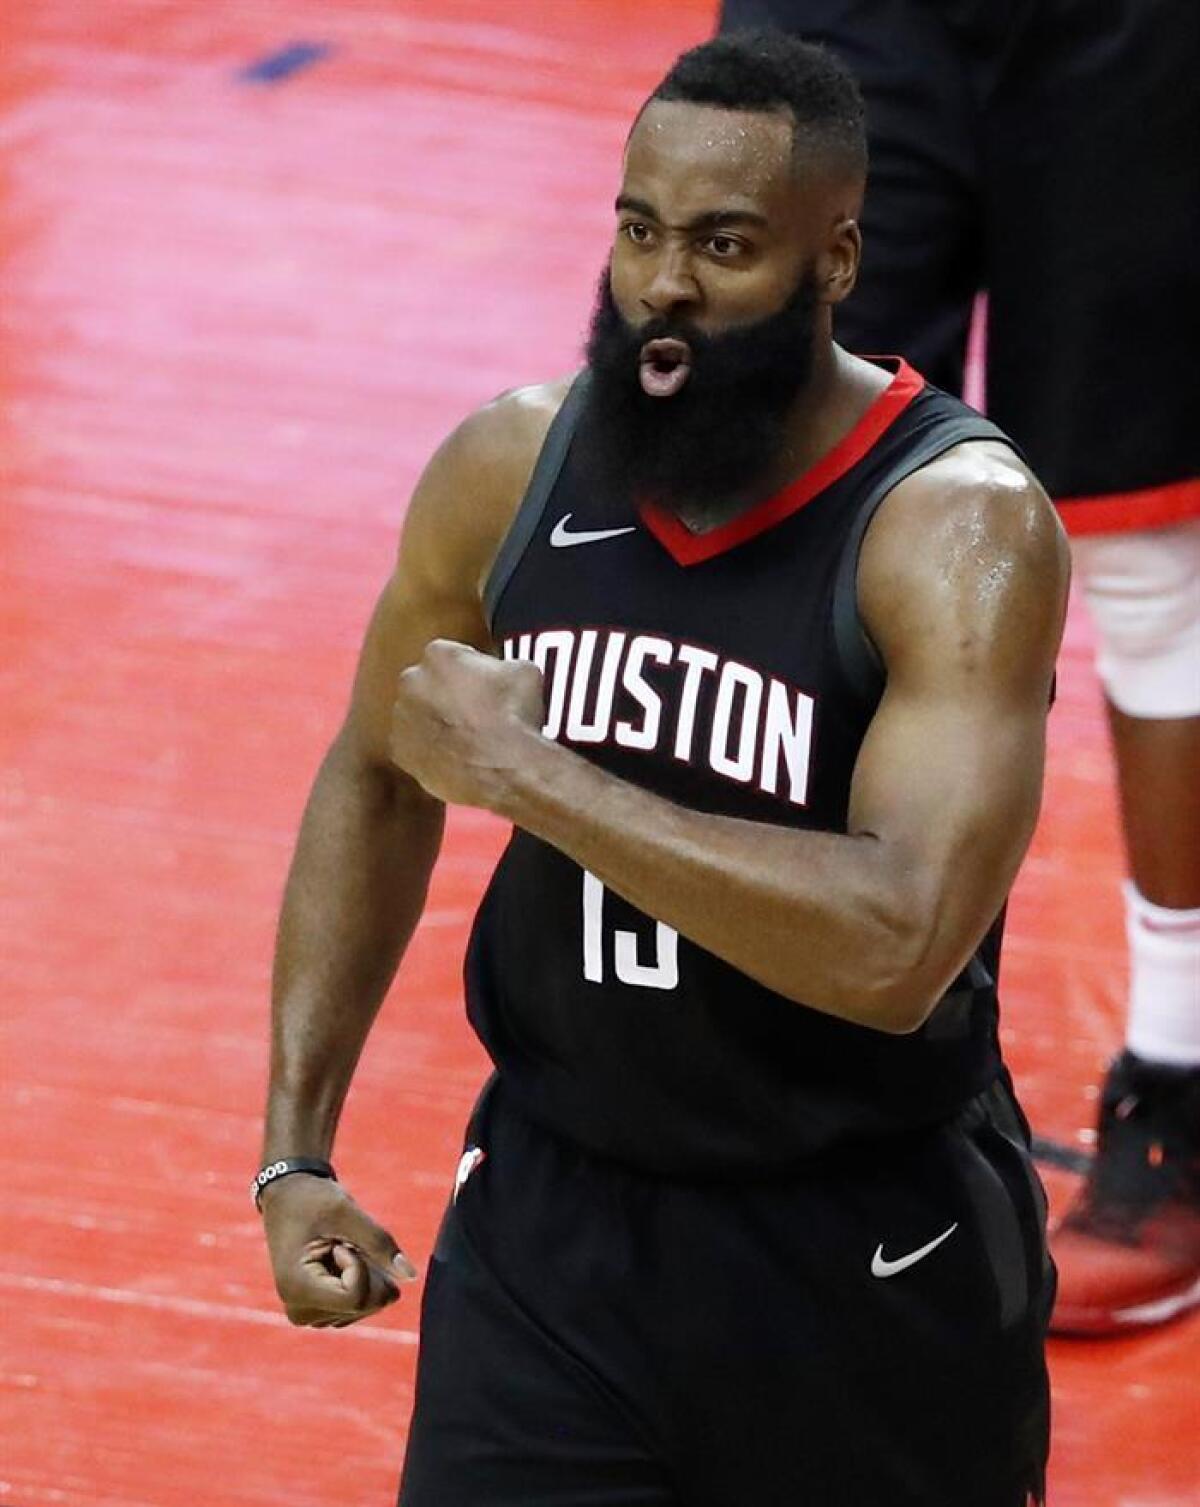 James Harden #13 of the Houston Rockets reacts in the second quarter of Game Seven of the Western Conference Finals of the 2018 NBA Playoffs at Toyota Center against the Golden State Warriors on May 28, 2018 in Houston, Texas.